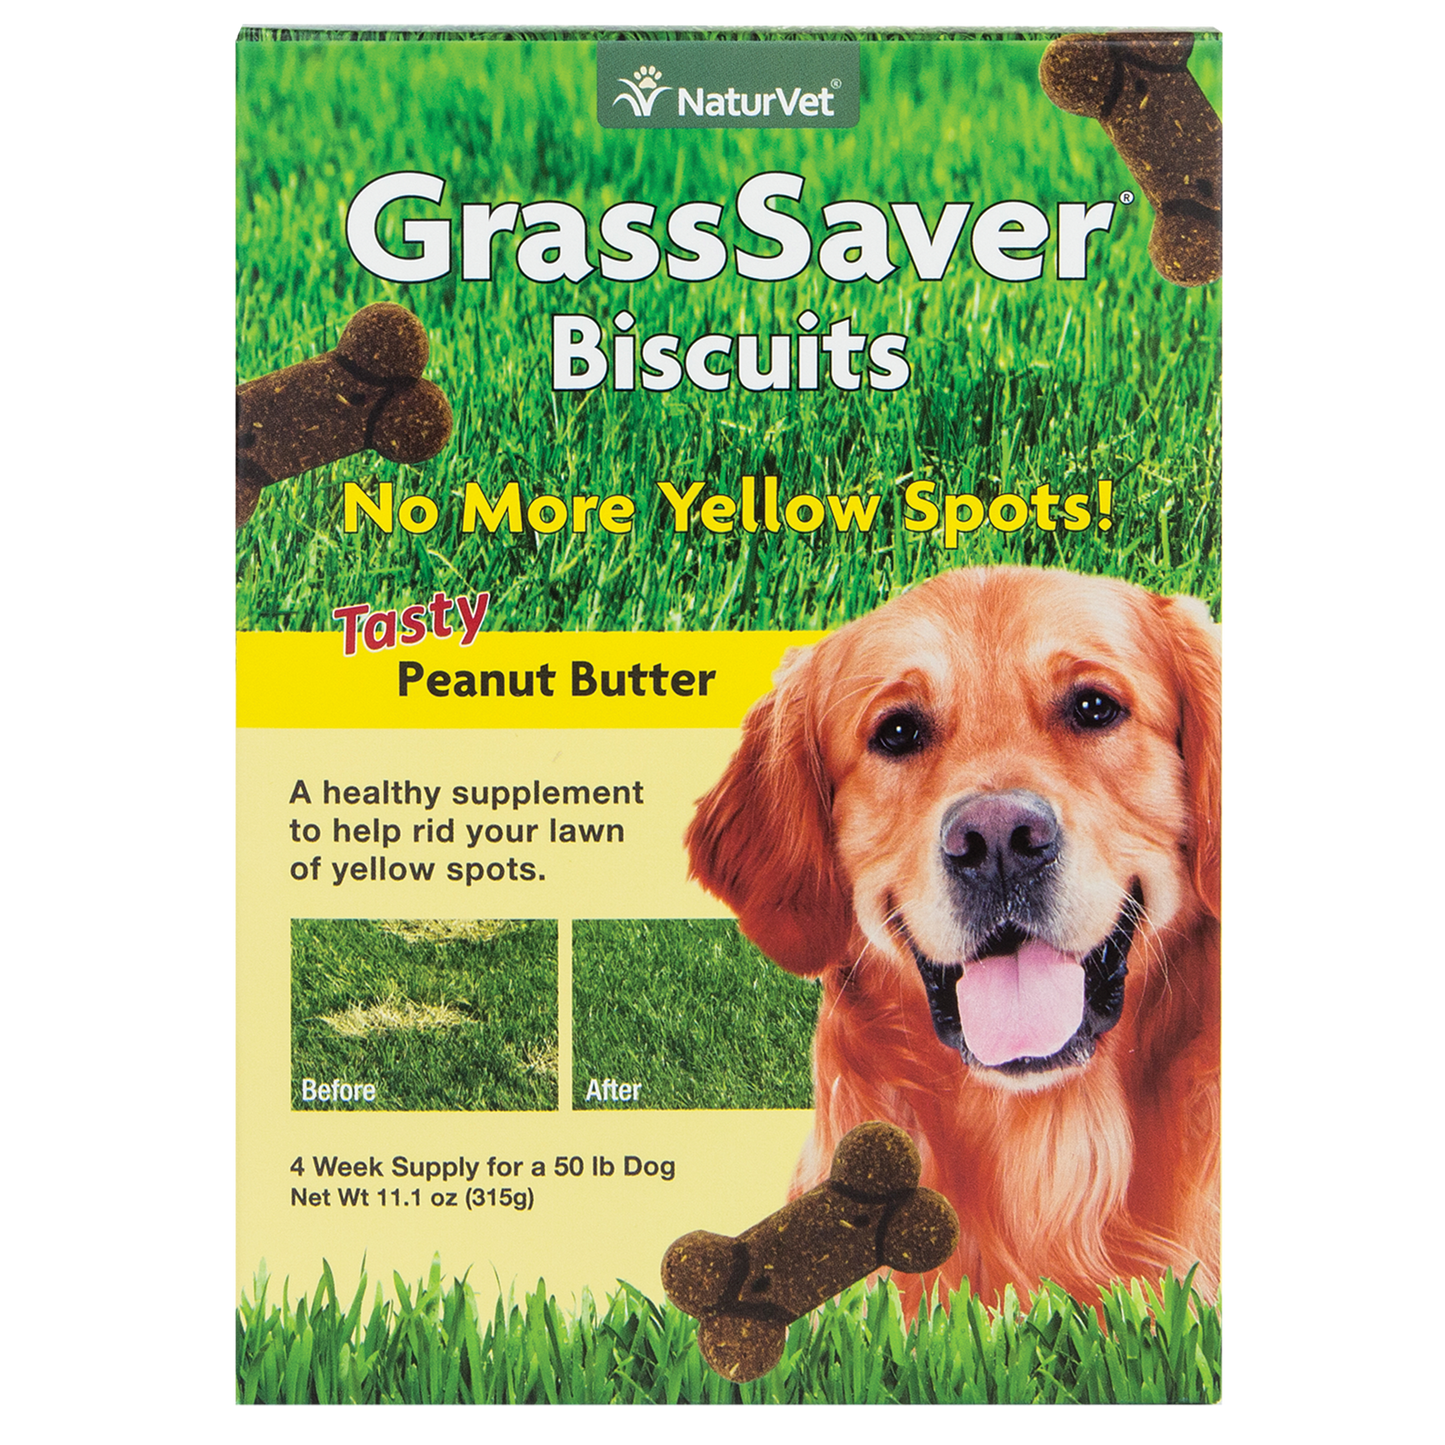 NaturVet – GrassSaver Biscuits for Dogs – Healthy Supplement to Help Rid Your Lawn of Yellow Spots – Enhanced with a Tasty Peanut Butter Flavor – 4 Week Suppy - 11.1oz